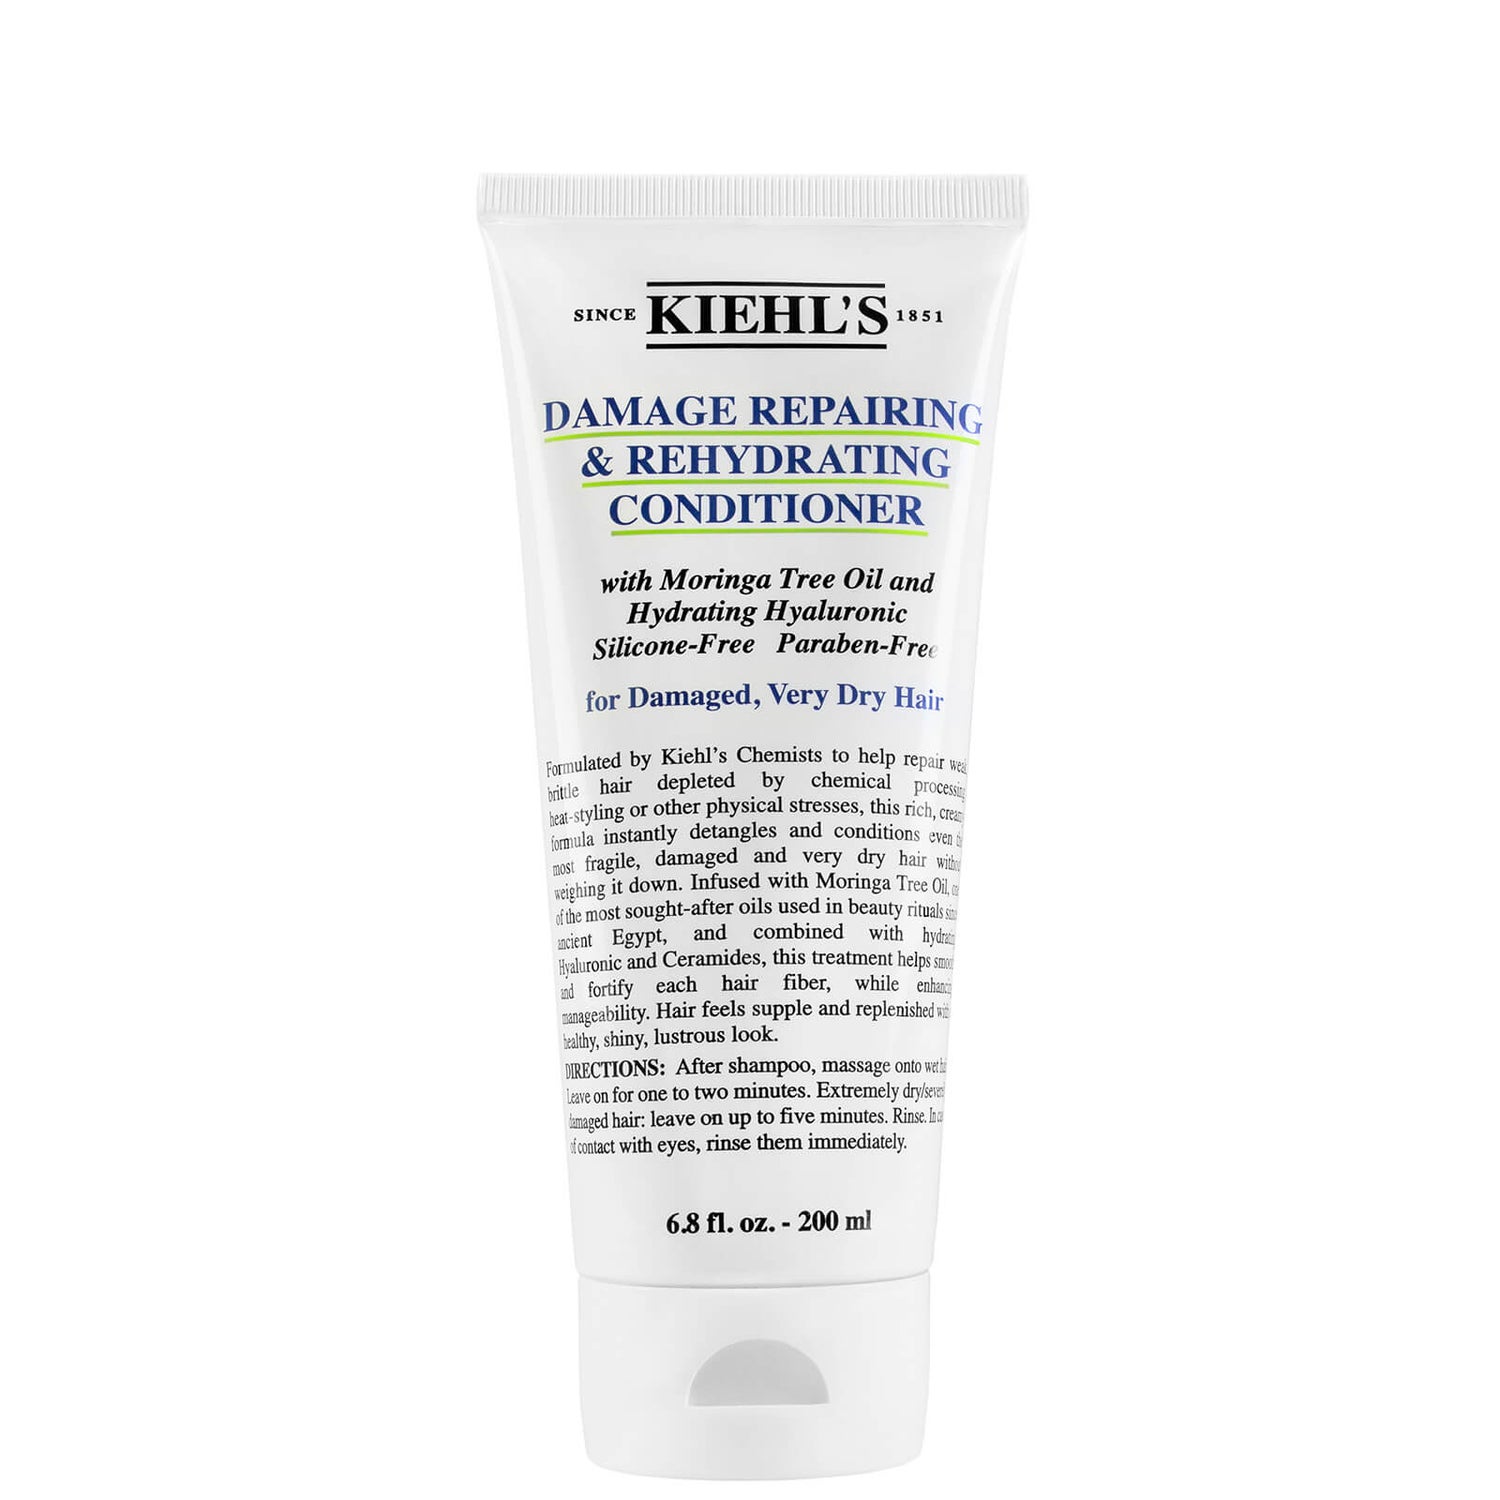 Kiehl's Damage Repairing and Rehydrating Conditioner 200ml